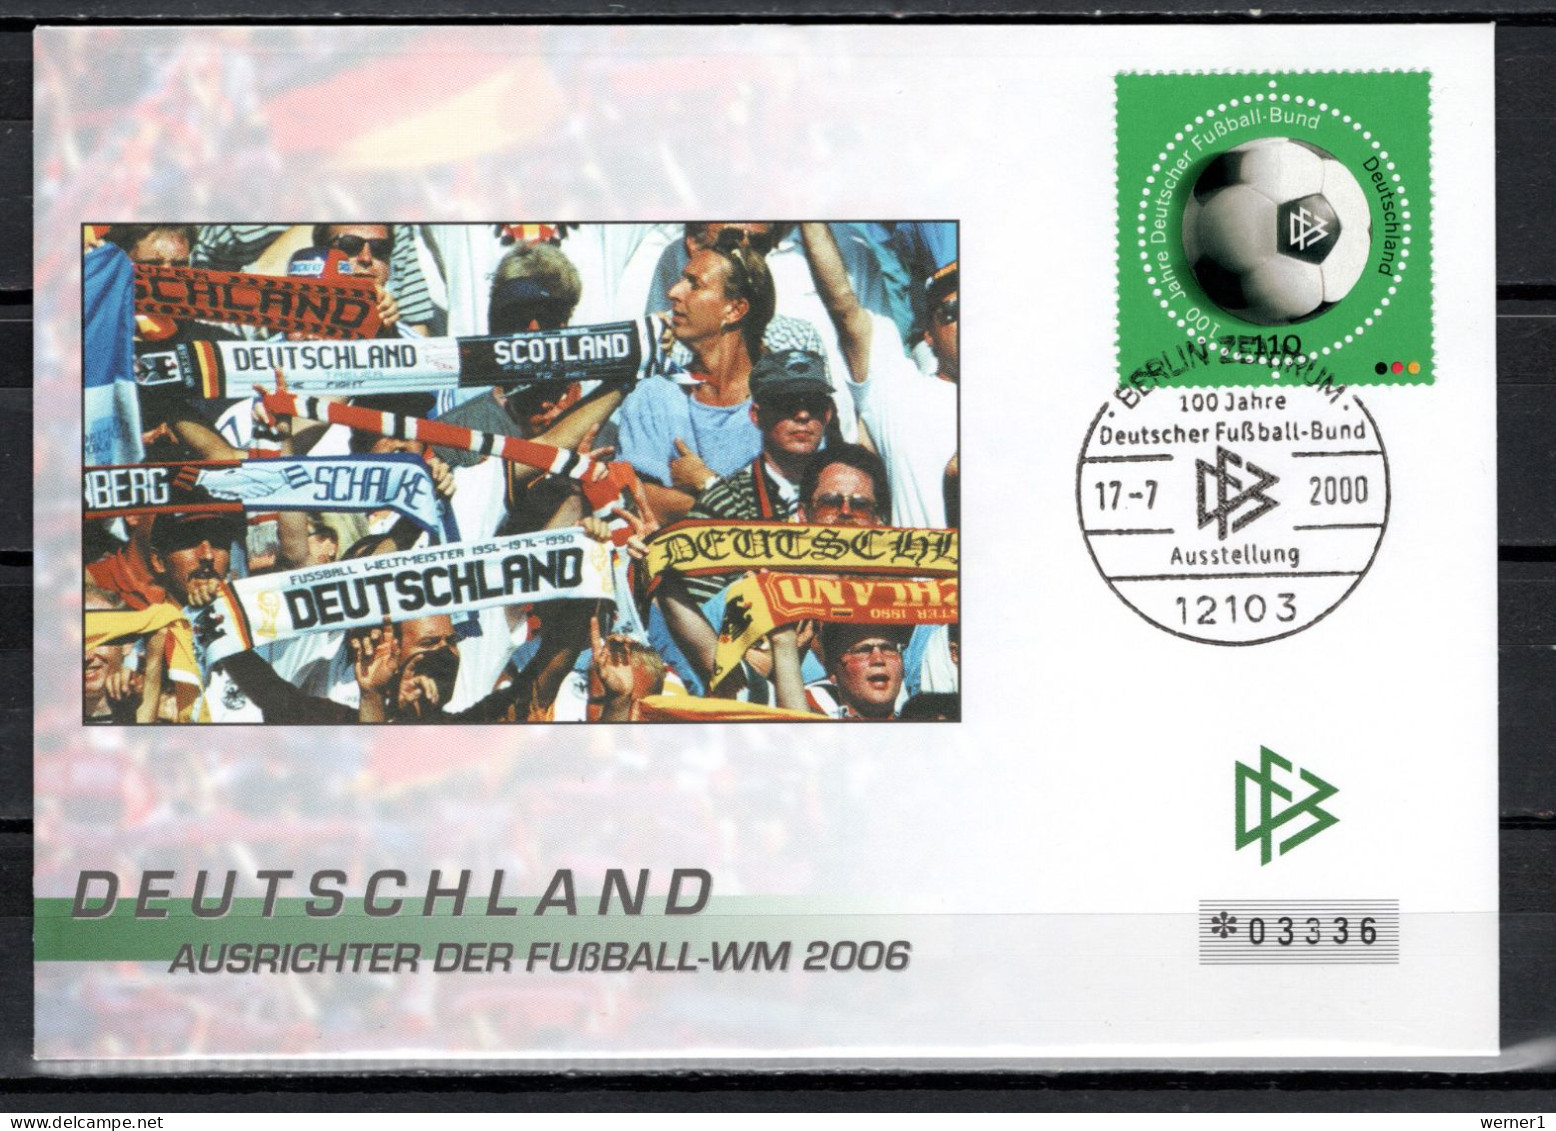 Germany 2000 Football Soccer World Cup Commemorative Cover - 2006 – Germania